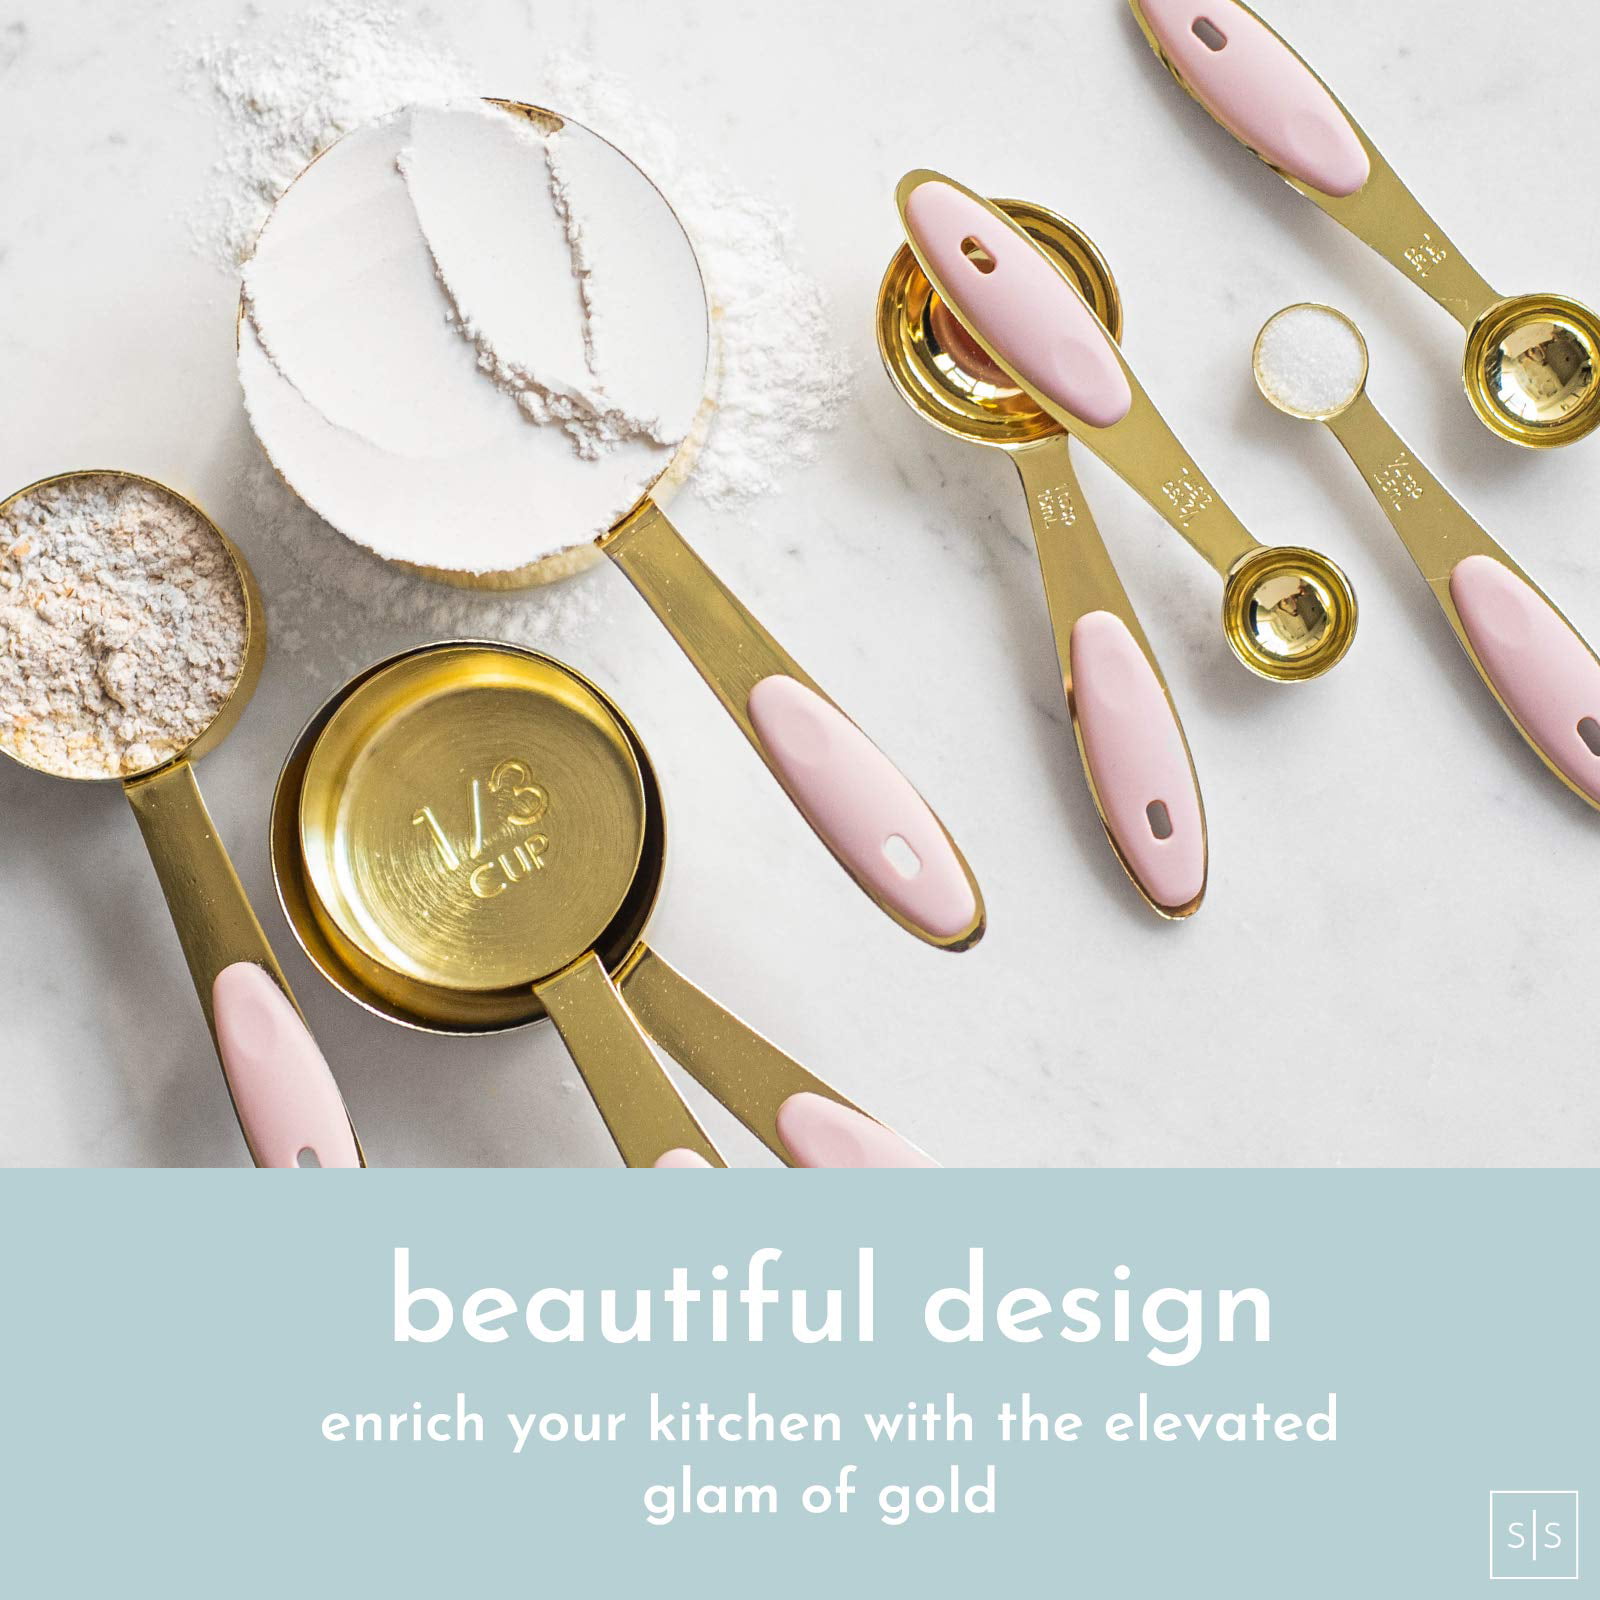 Golden Metal Measuring Cups And Spoons Set - Perfect For Baking